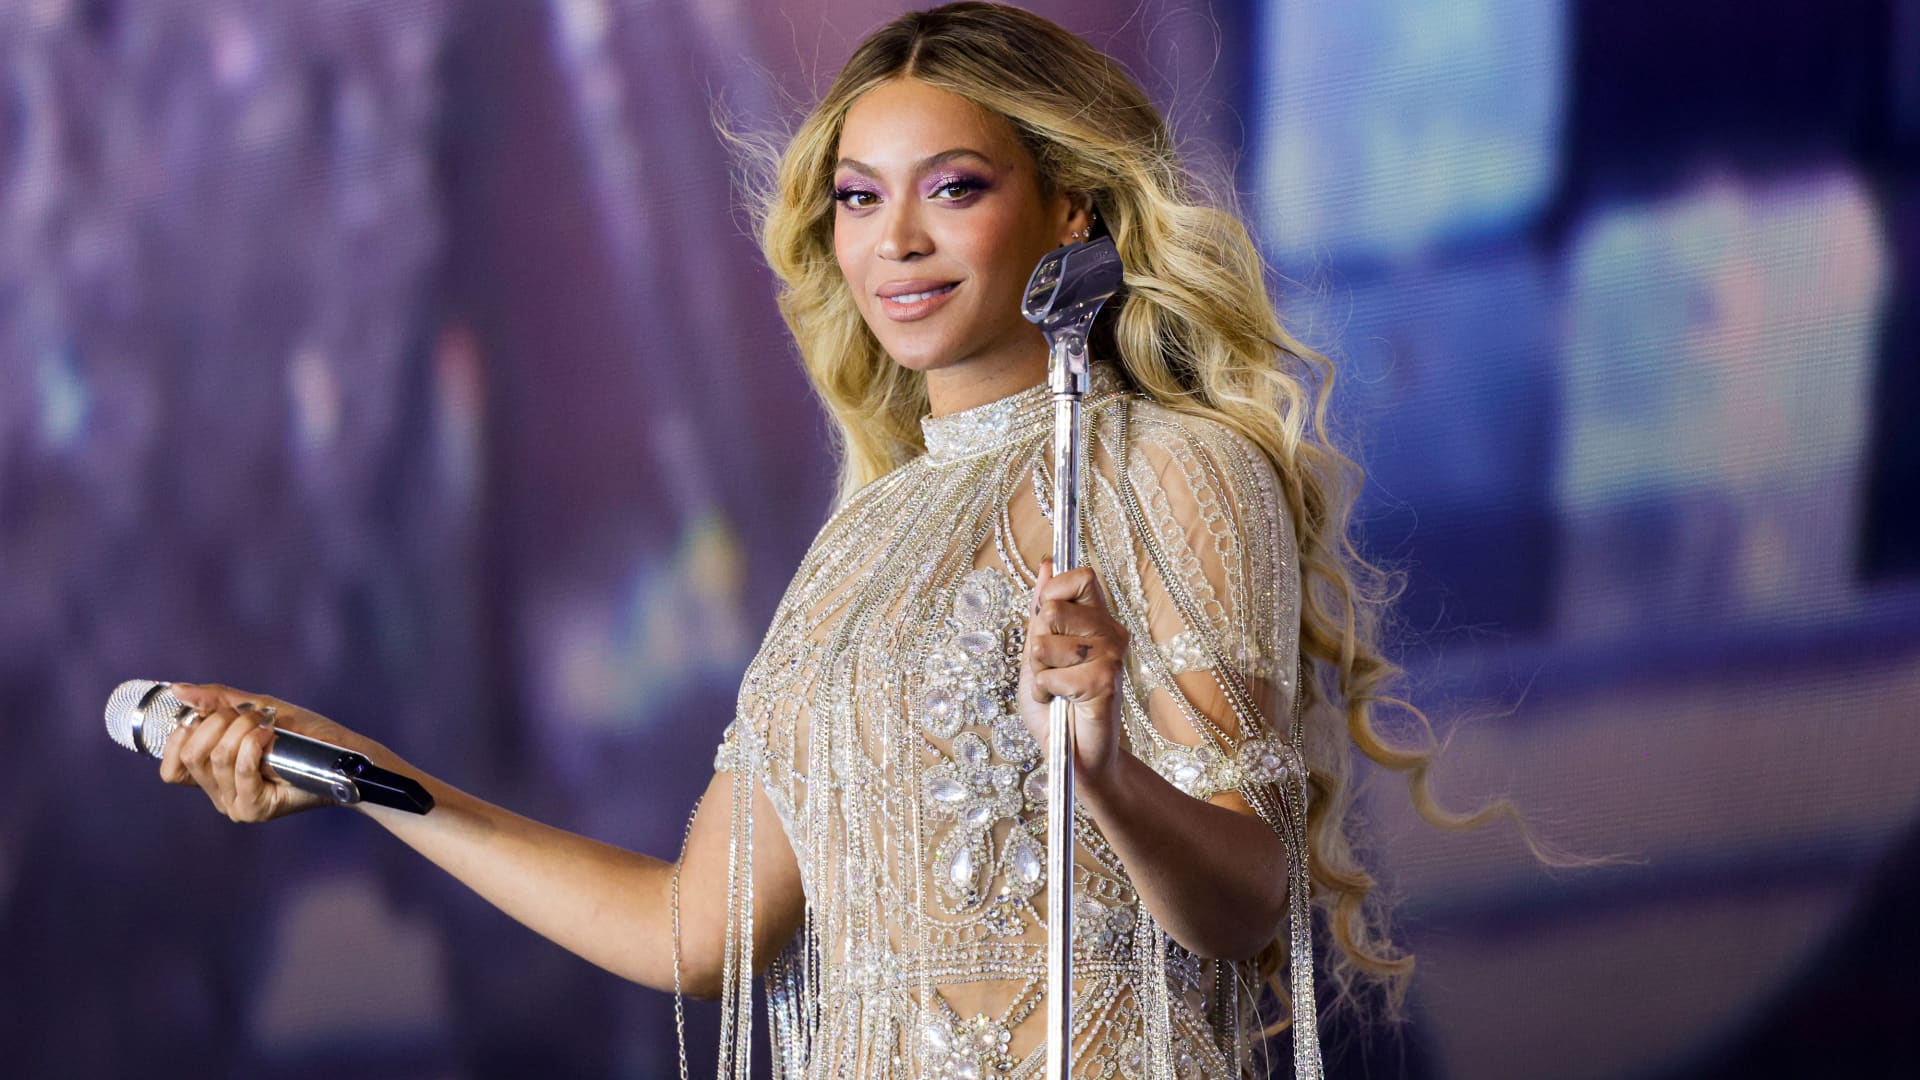 ‘Tourflation’? Taylor Swift, Beyoncé and Bruce Springsteen could be making inflation worse